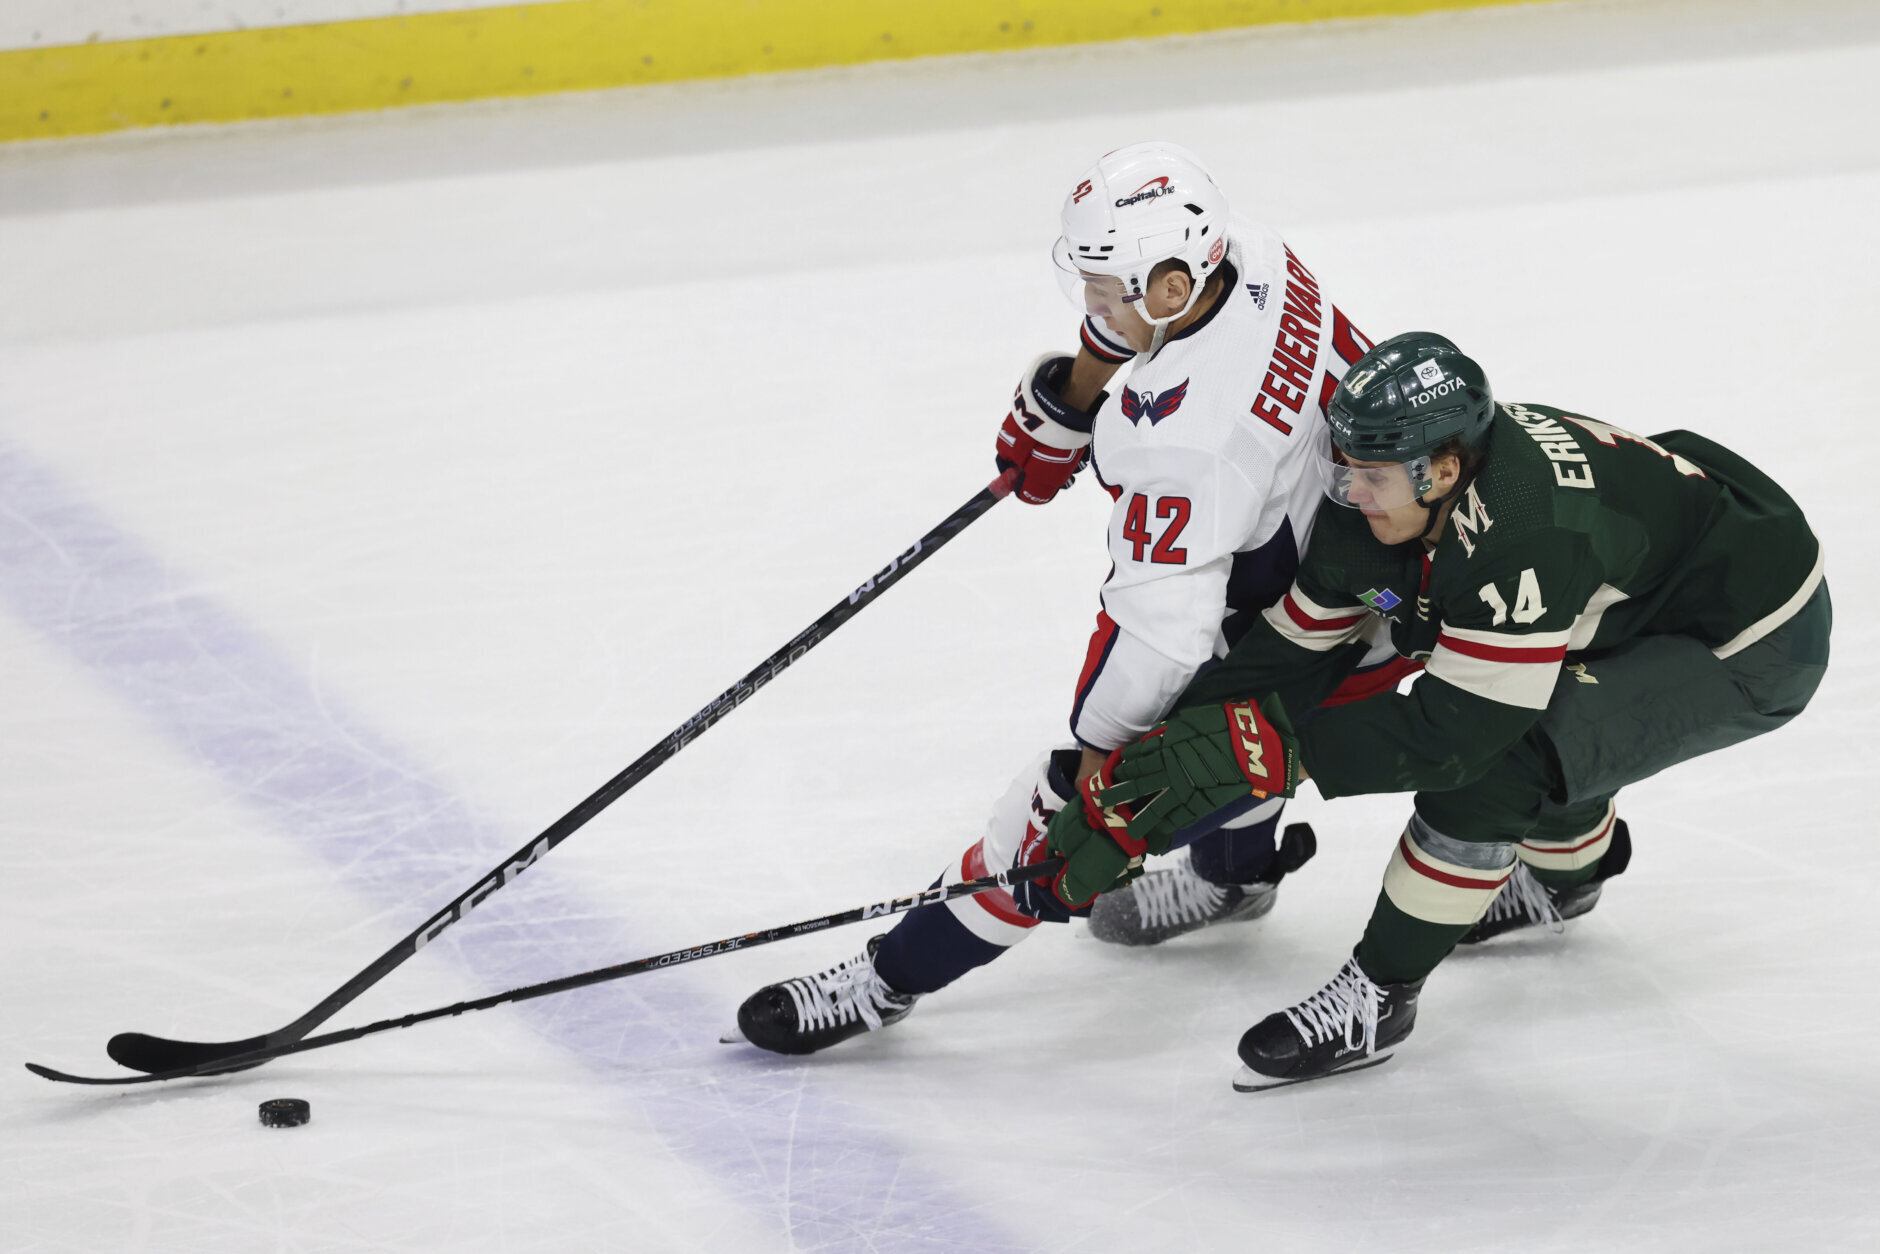 NHL roundup: Matt Boldy's first hat trick boosts Wild past Wings